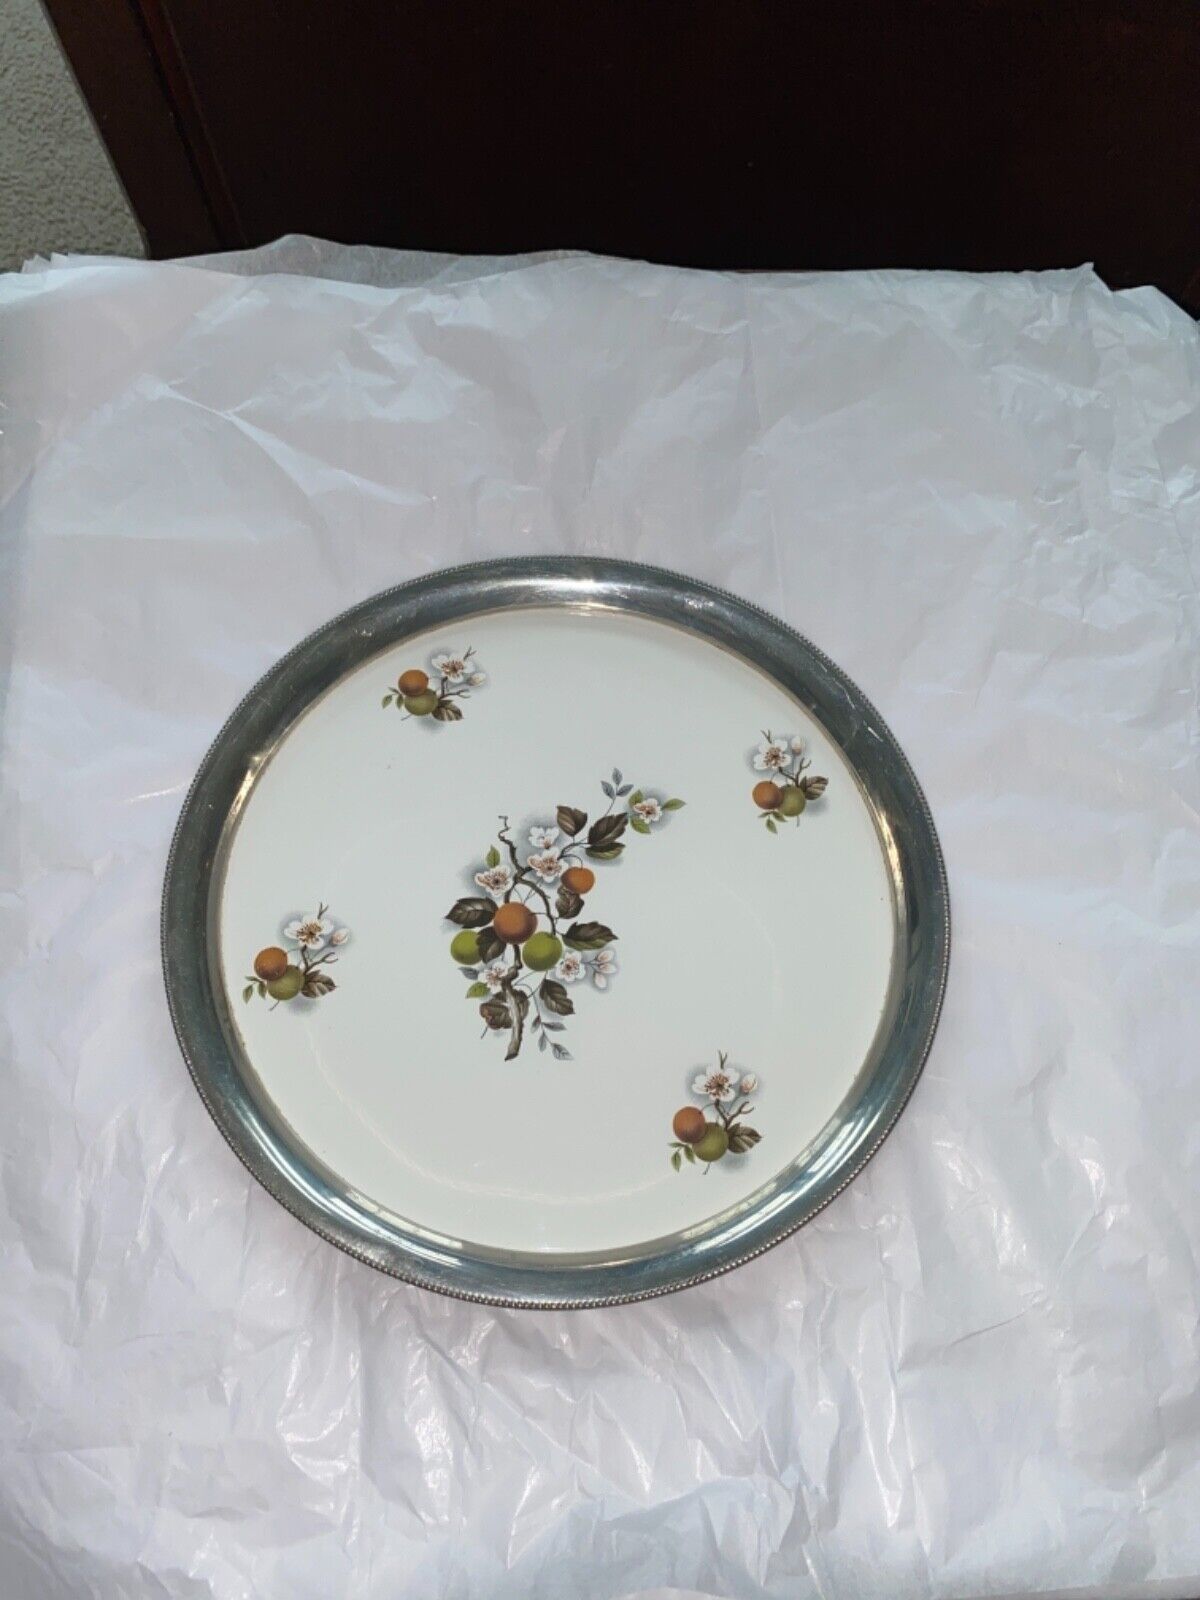 VNTAGE PEWTER AND PORCELAIN ROUND SERVING TRAY WITH FELT BOTTOM